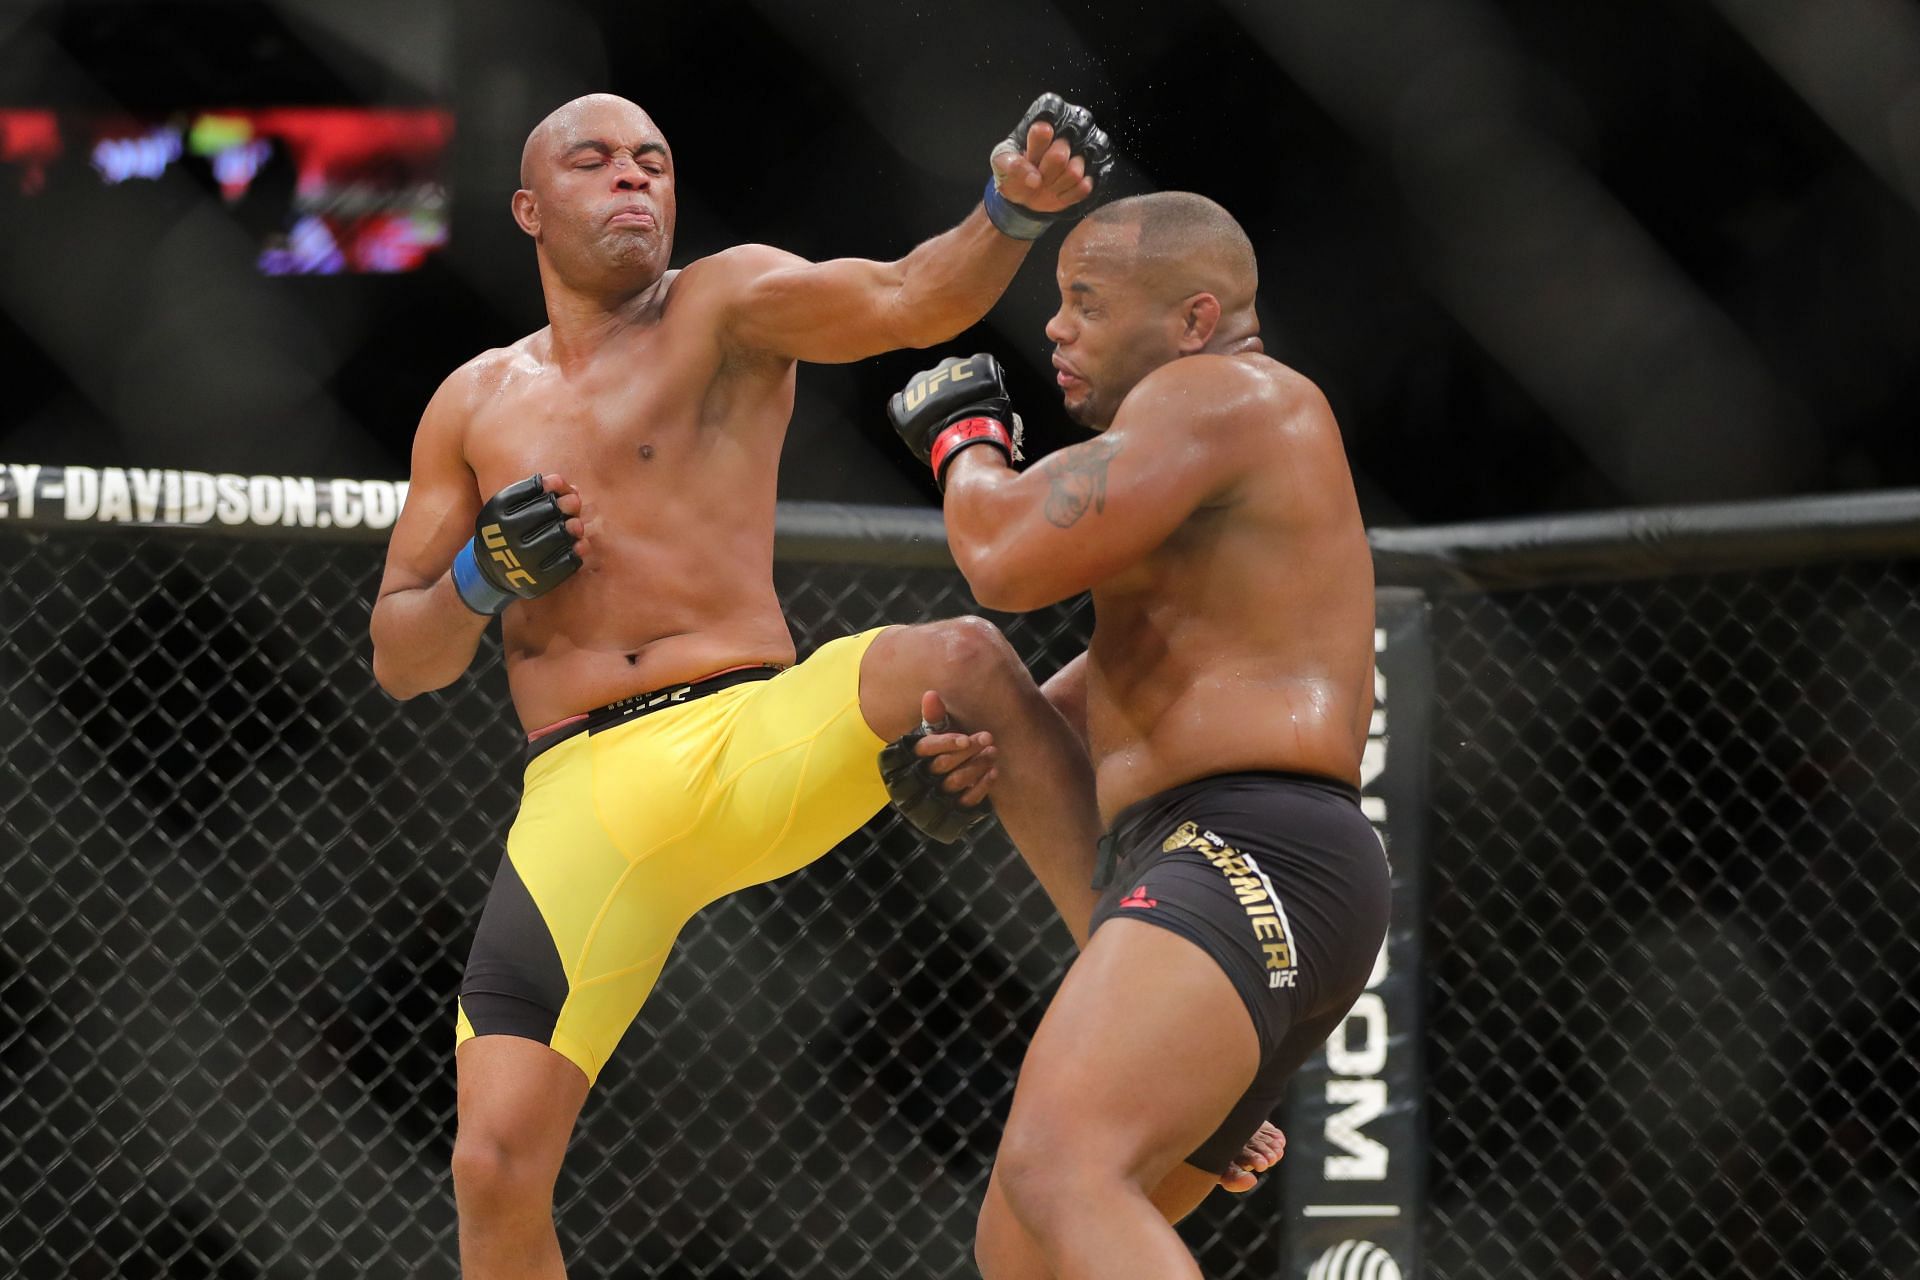 The great Anderson Silva fought for gold in his second octagon appearance